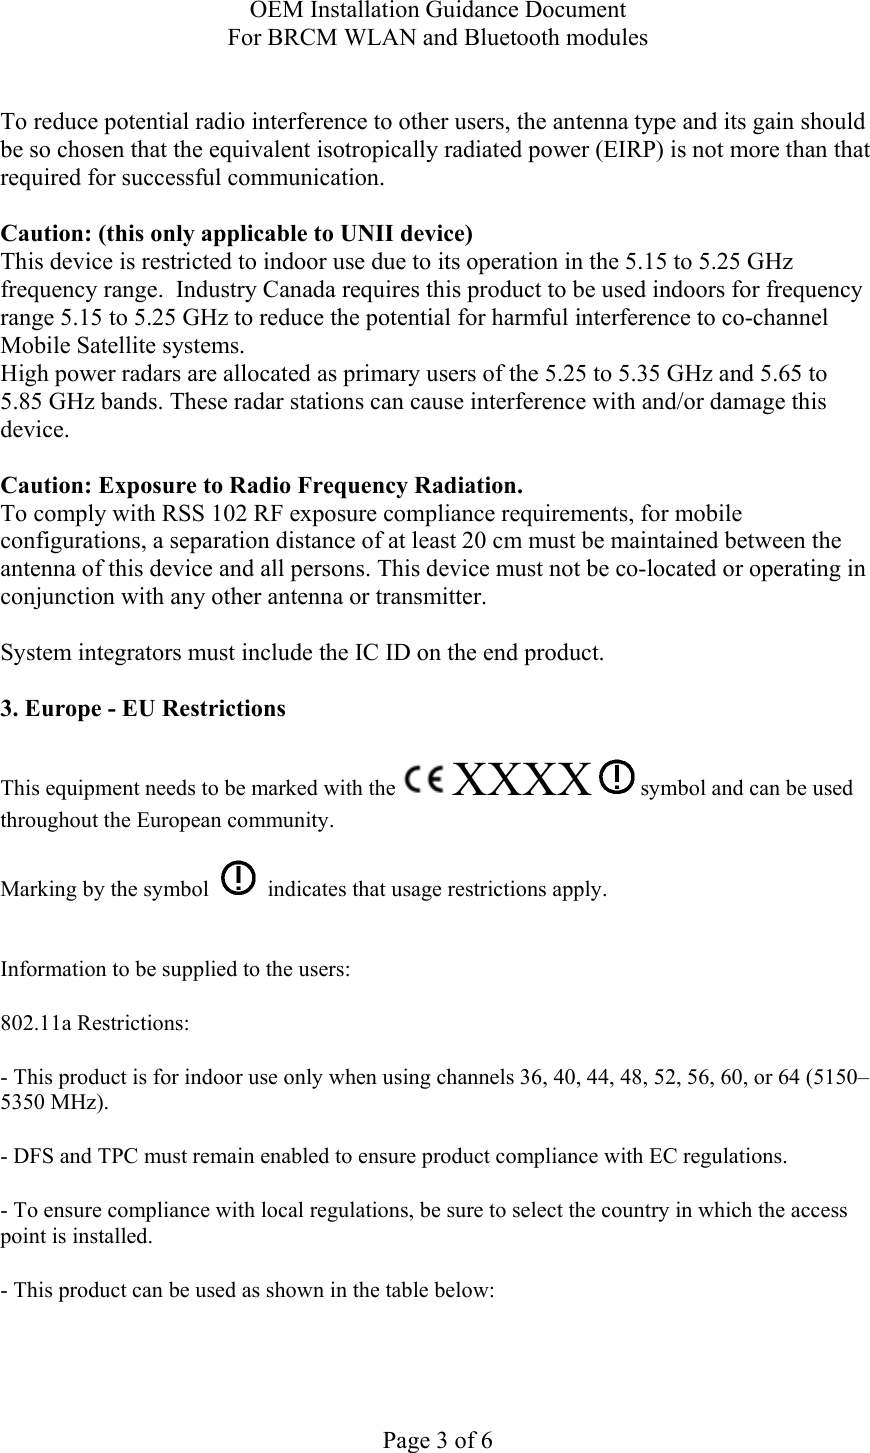 OEM Installation Guidance Document For BRCM WLAN and Bluetooth modules  Page 3 of 6  To reduce potential radio interference to other users, the antenna type and its gain should be so chosen that the equivalent isotropically radiated power (EIRP) is not more than that required for successful communication.  Caution: (this only applicable to UNII device) This device is restricted to indoor use due to its operation in the 5.15 to 5.25 GHz frequency range.  Industry Canada requires this product to be used indoors for frequency range 5.15 to 5.25 GHz to reduce the potential for harmful interference to co-channel Mobile Satellite systems. High power radars are allocated as primary users of the 5.25 to 5.35 GHz and 5.65 to 5.85 GHz bands. These radar stations can cause interference with and/or damage this device.  Caution: Exposure to Radio Frequency Radiation. To comply with RSS 102 RF exposure compliance requirements, for mobile configurations, a separation distance of at least 20 cm must be maintained between the antenna of this device and all persons. This device must not be co-located or operating in conjunction with any other antenna or transmitter.  System integrators must include the IC ID on the end product.   3. Europe - EU Restrictions This equipment needs to be marked with the   XXXX  symbol and can be used throughout the European community.  Marking by the symbol     indicates that usage restrictions apply.  Information to be supplied to the users: 802.11a Restrictions: - This product is for indoor use only when using channels 36, 40, 44, 48, 52, 56, 60, or 64 (5150–5350 MHz).       - DFS and TPC must remain enabled to ensure product compliance with EC regulations.      - To ensure compliance with local regulations, be sure to select the country in which the access point is installed. - This product can be used as shown in the table below:  